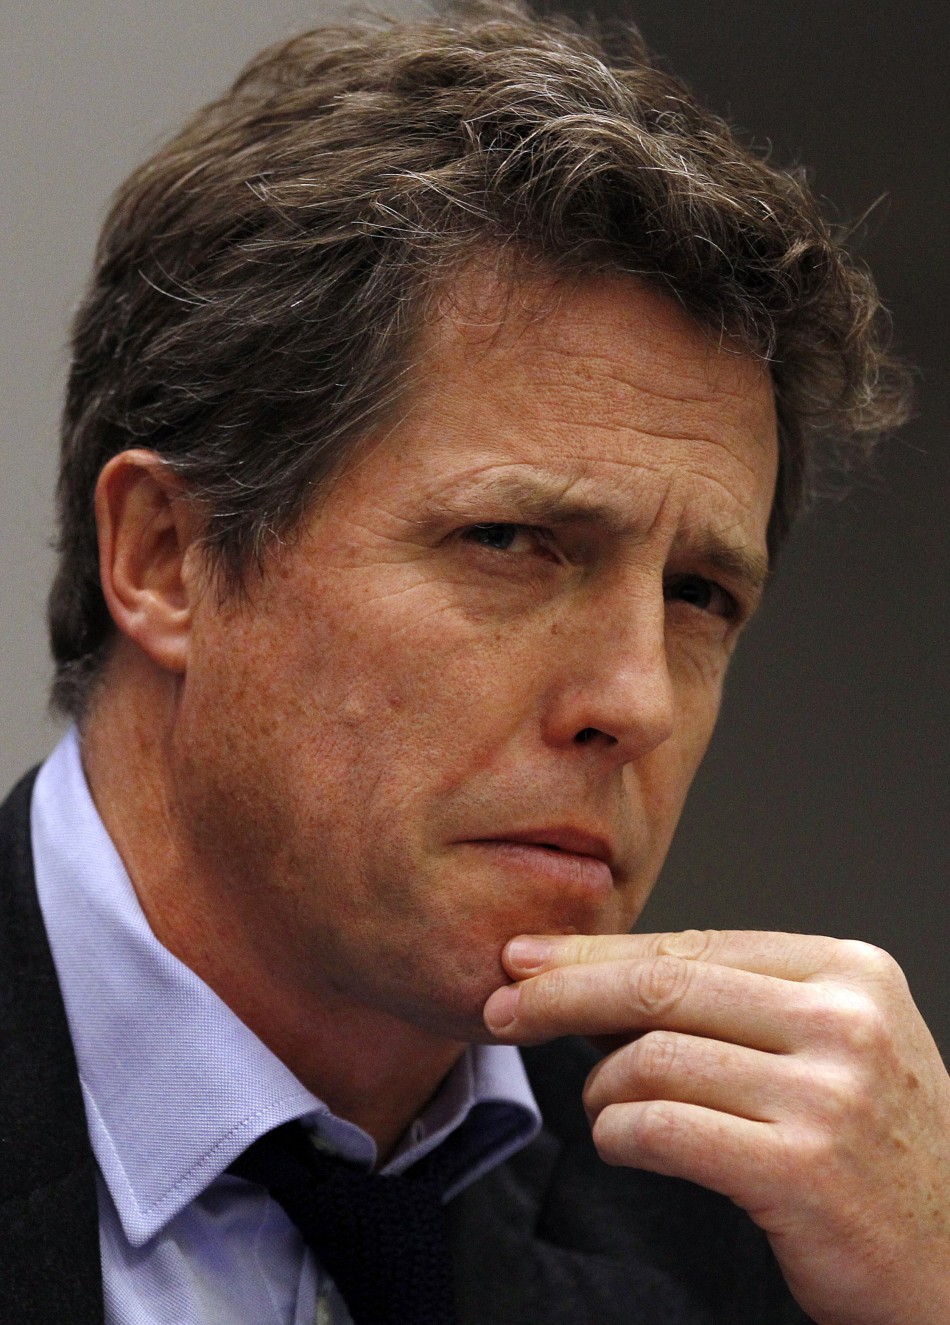 British actor Hugh Grant will be among the first witnesses to give evidence against the hacking practices conducted by the News of the World.